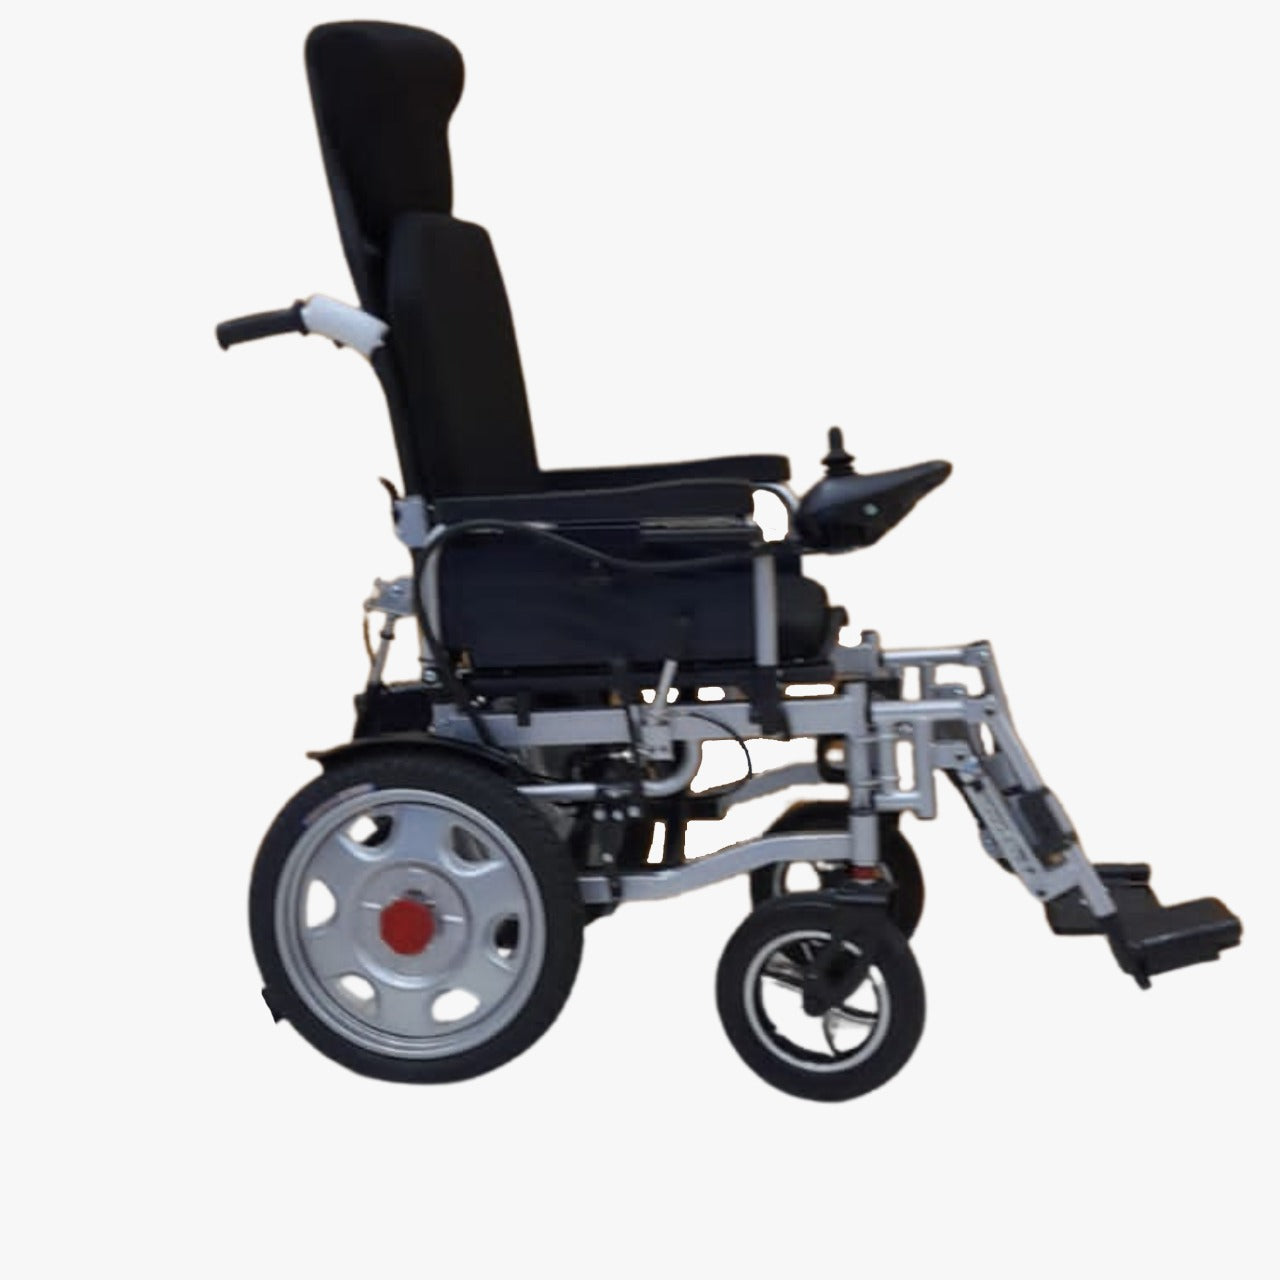 Megawheels Foldable Electric Mobility Wheelchair 24 v